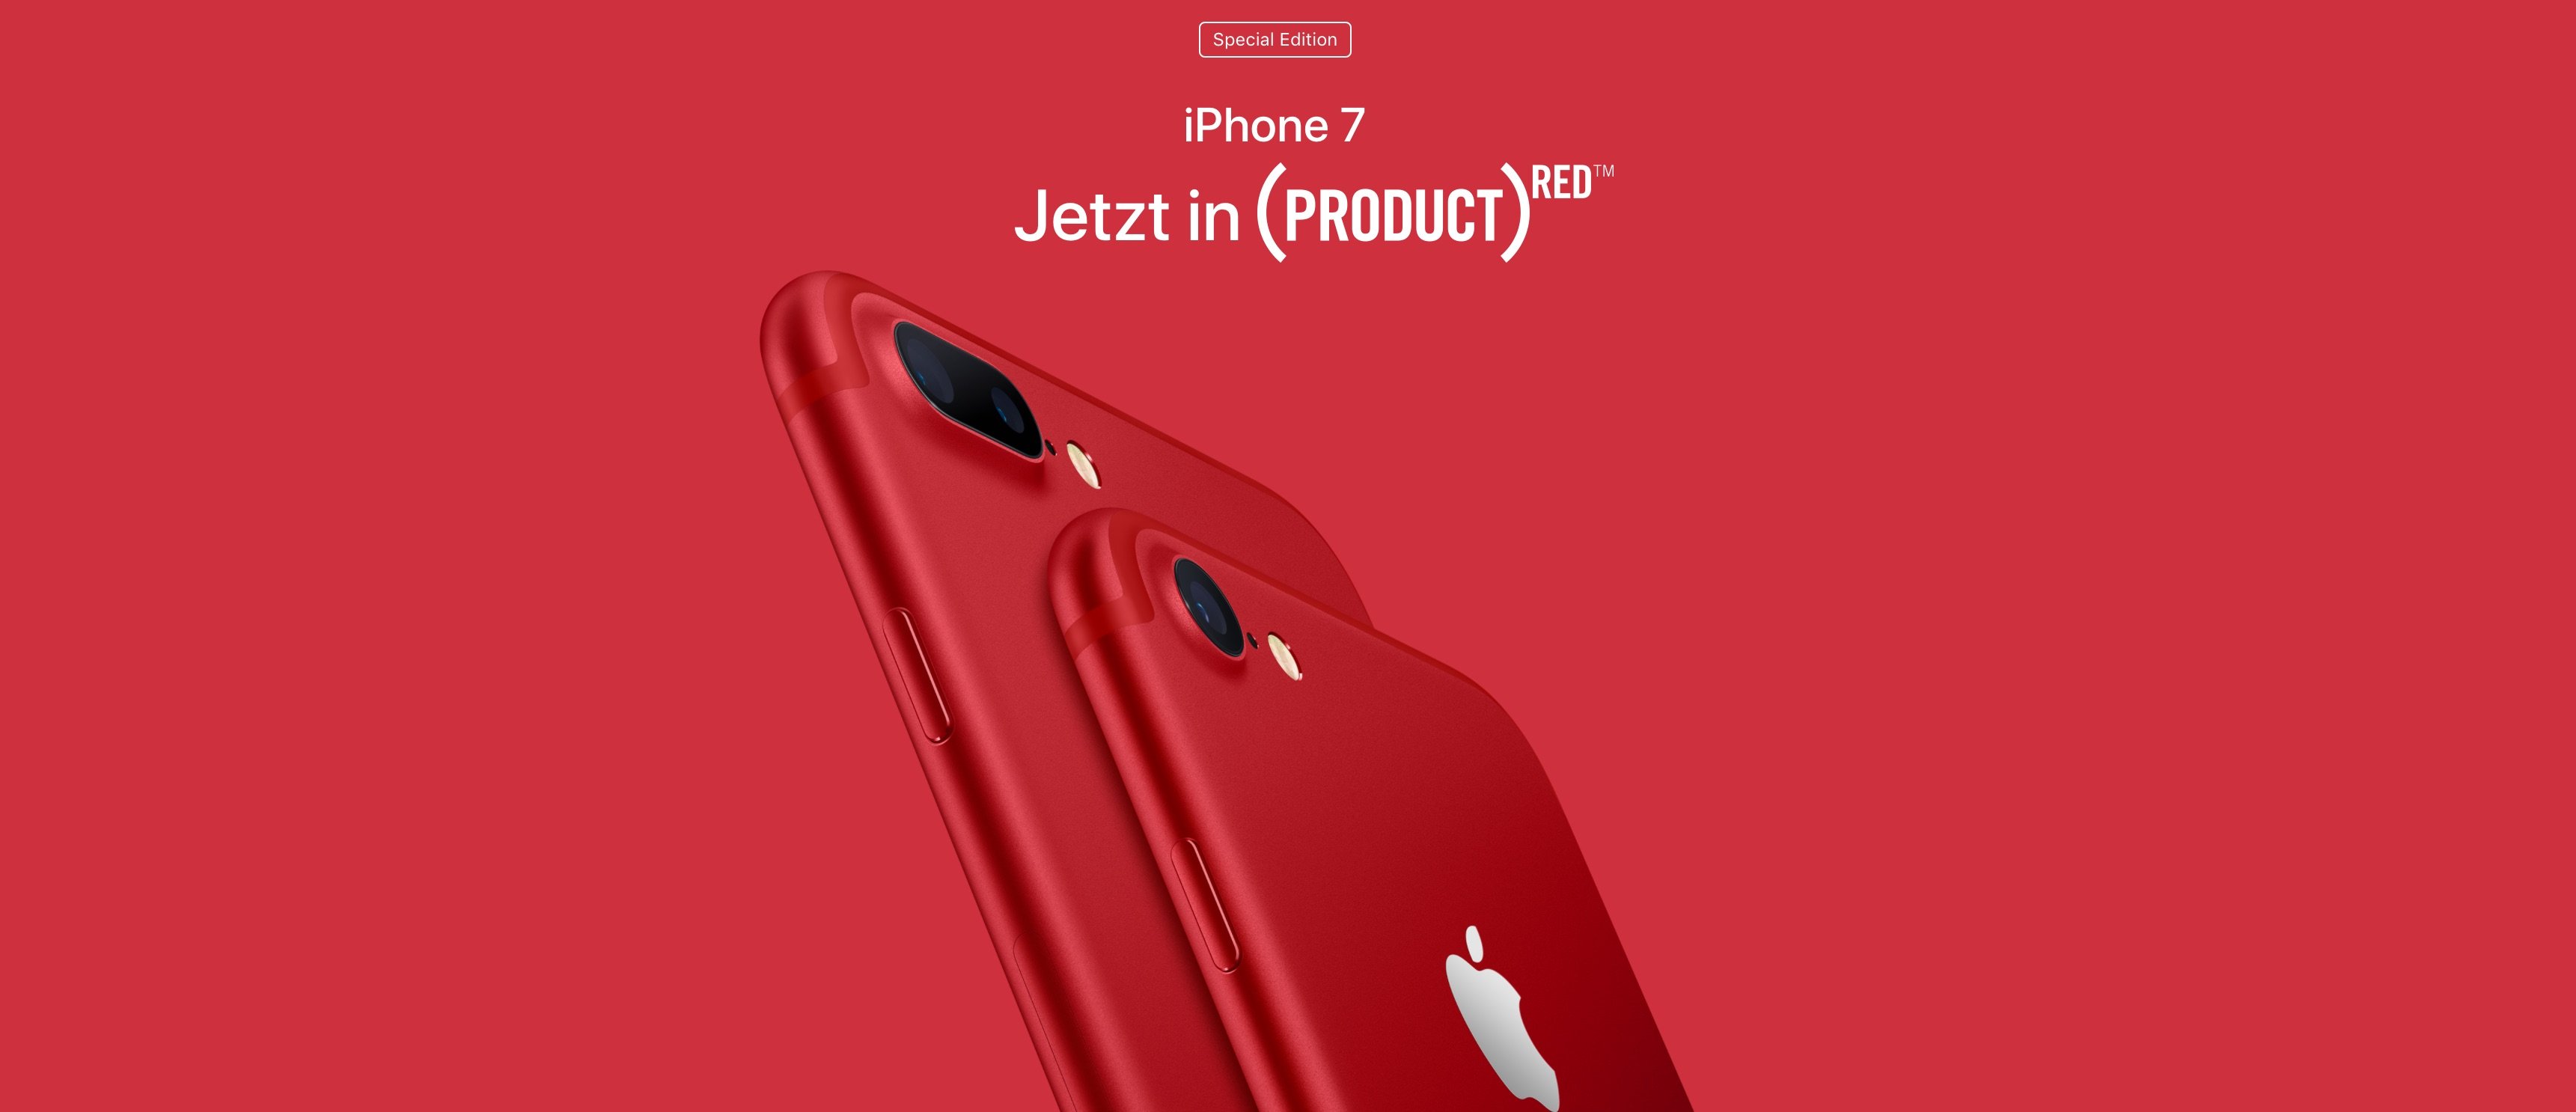 Apple iPhone 7 RED Edition: Spenden auch in China 3